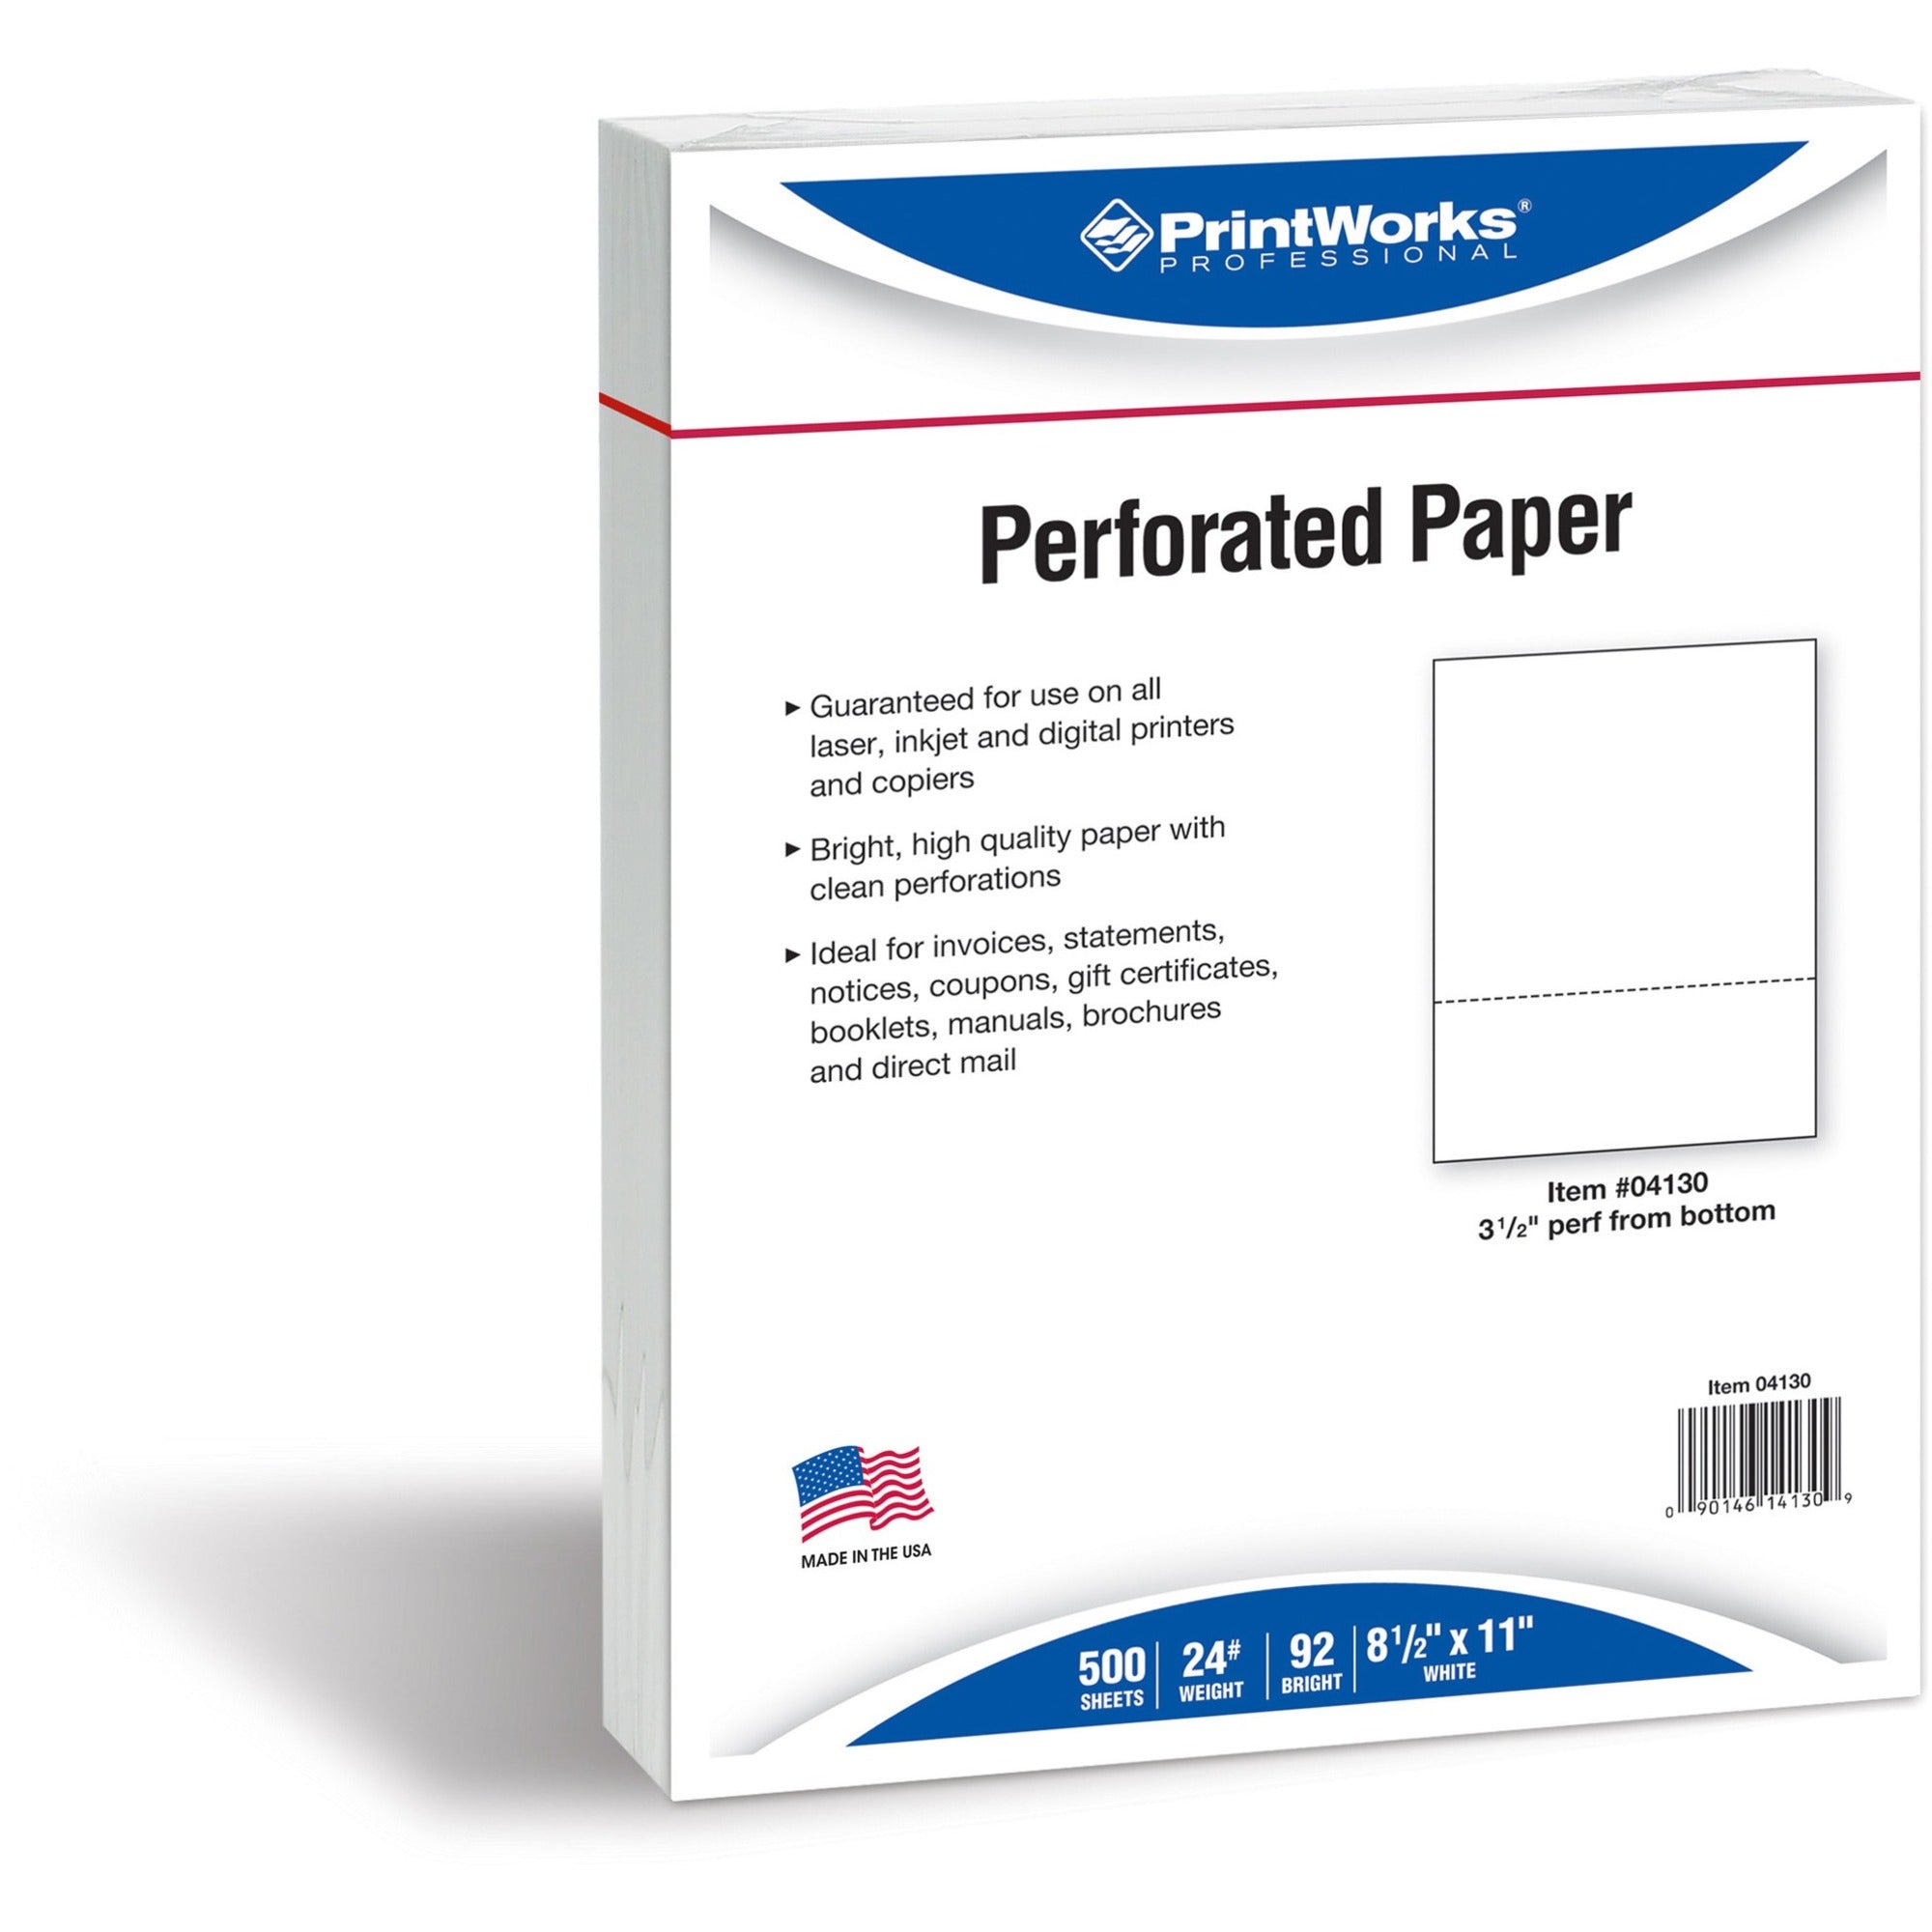 PrintWorks Professional Pre-Perforated Paper for Invoices, Statements, Gift Certificates & More - 92 Brightness - Letter - 8 1/2" x 11" - 24 lb Basis Weight - Smooth - 500 / Ream - Perforated - White - 